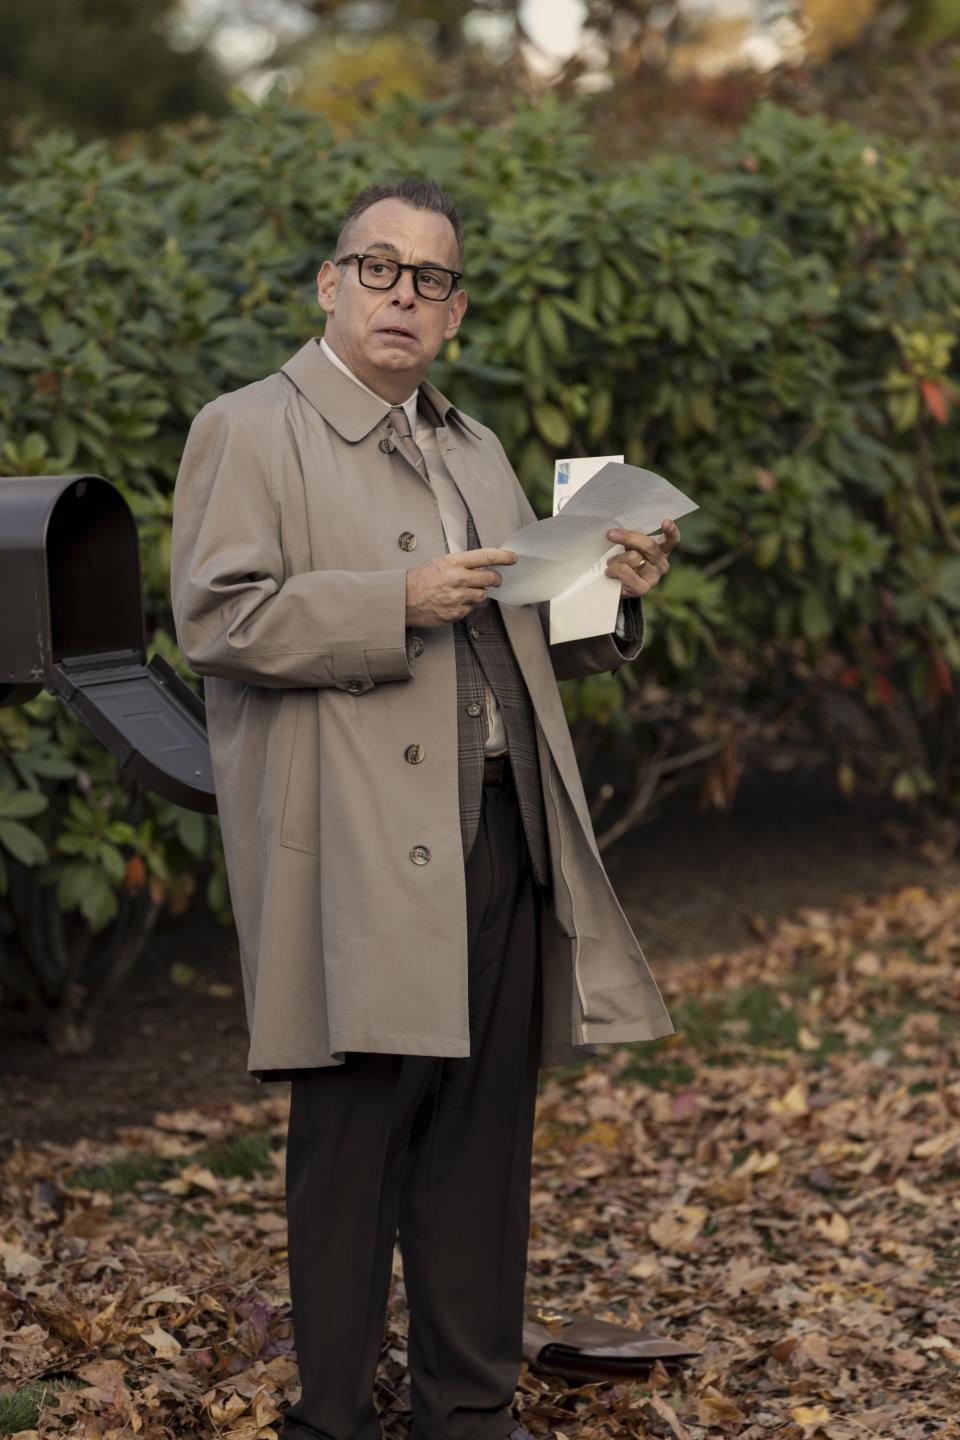 Joe Mantello as Graff in "The Watcher" opening a letter while standing outside